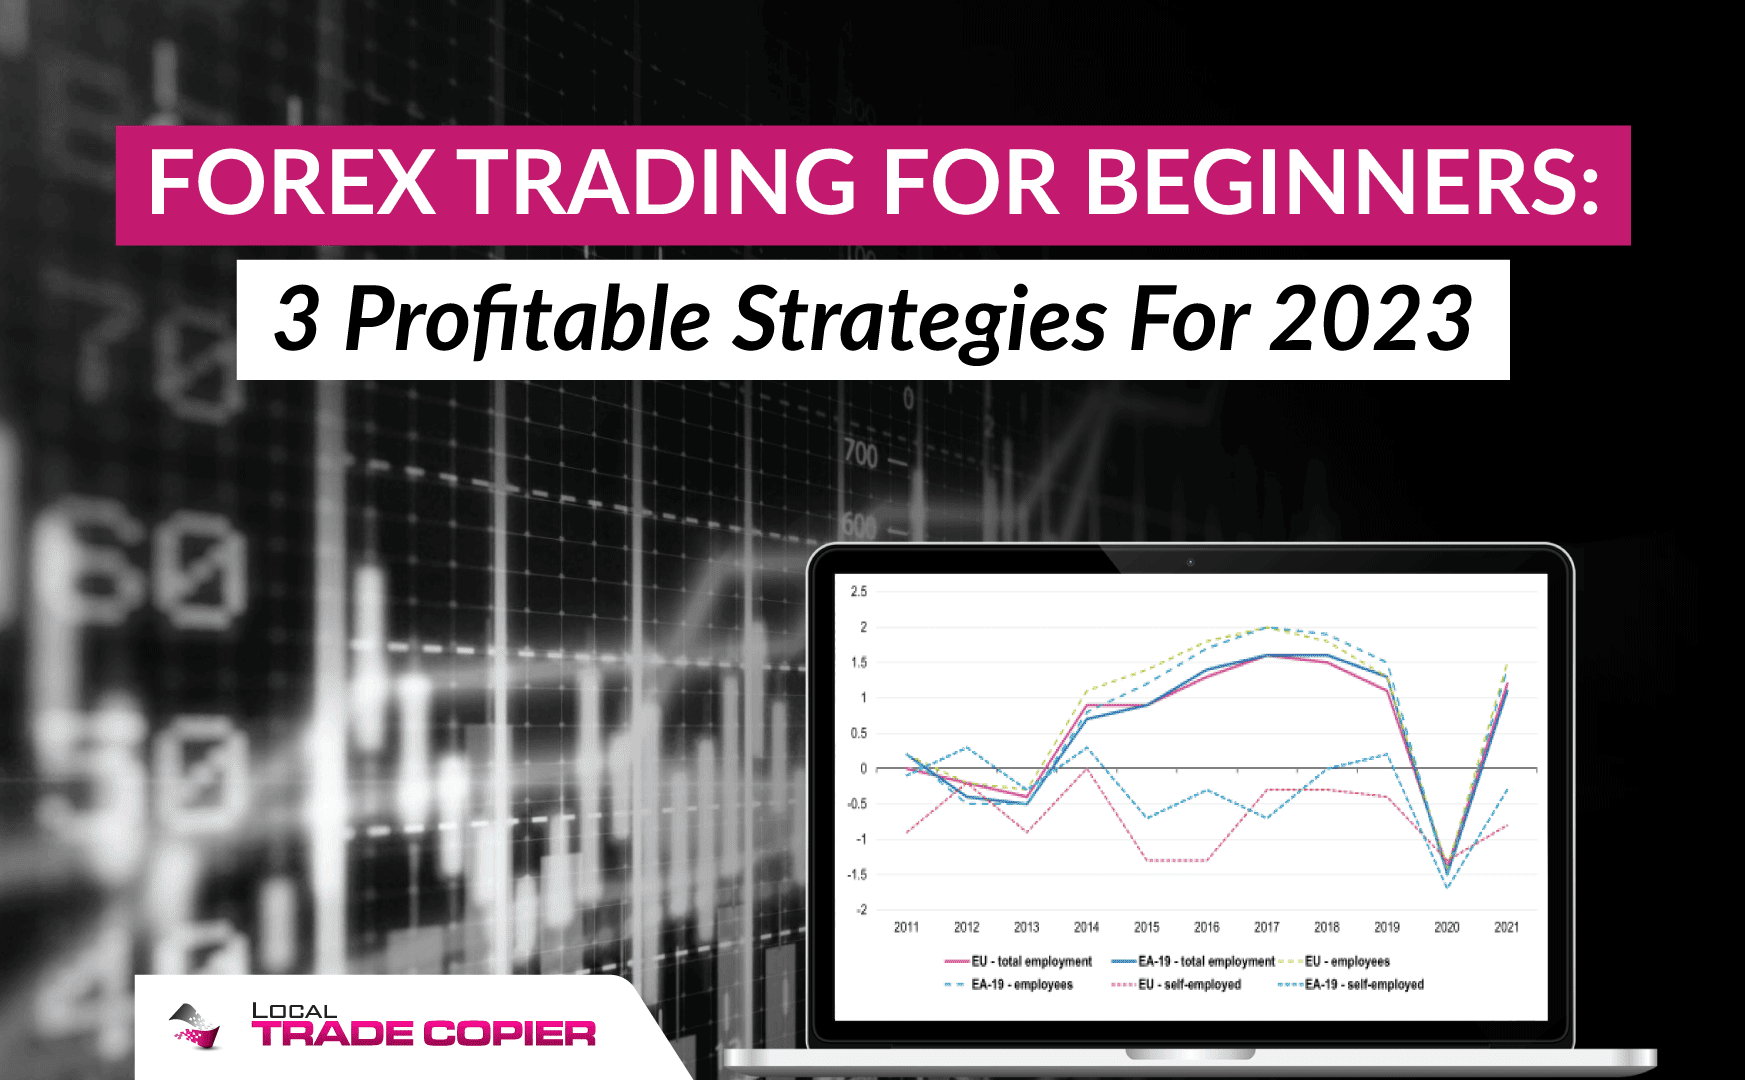 Forex Trading For Beginners: 3 Profitable Strategies For 2023